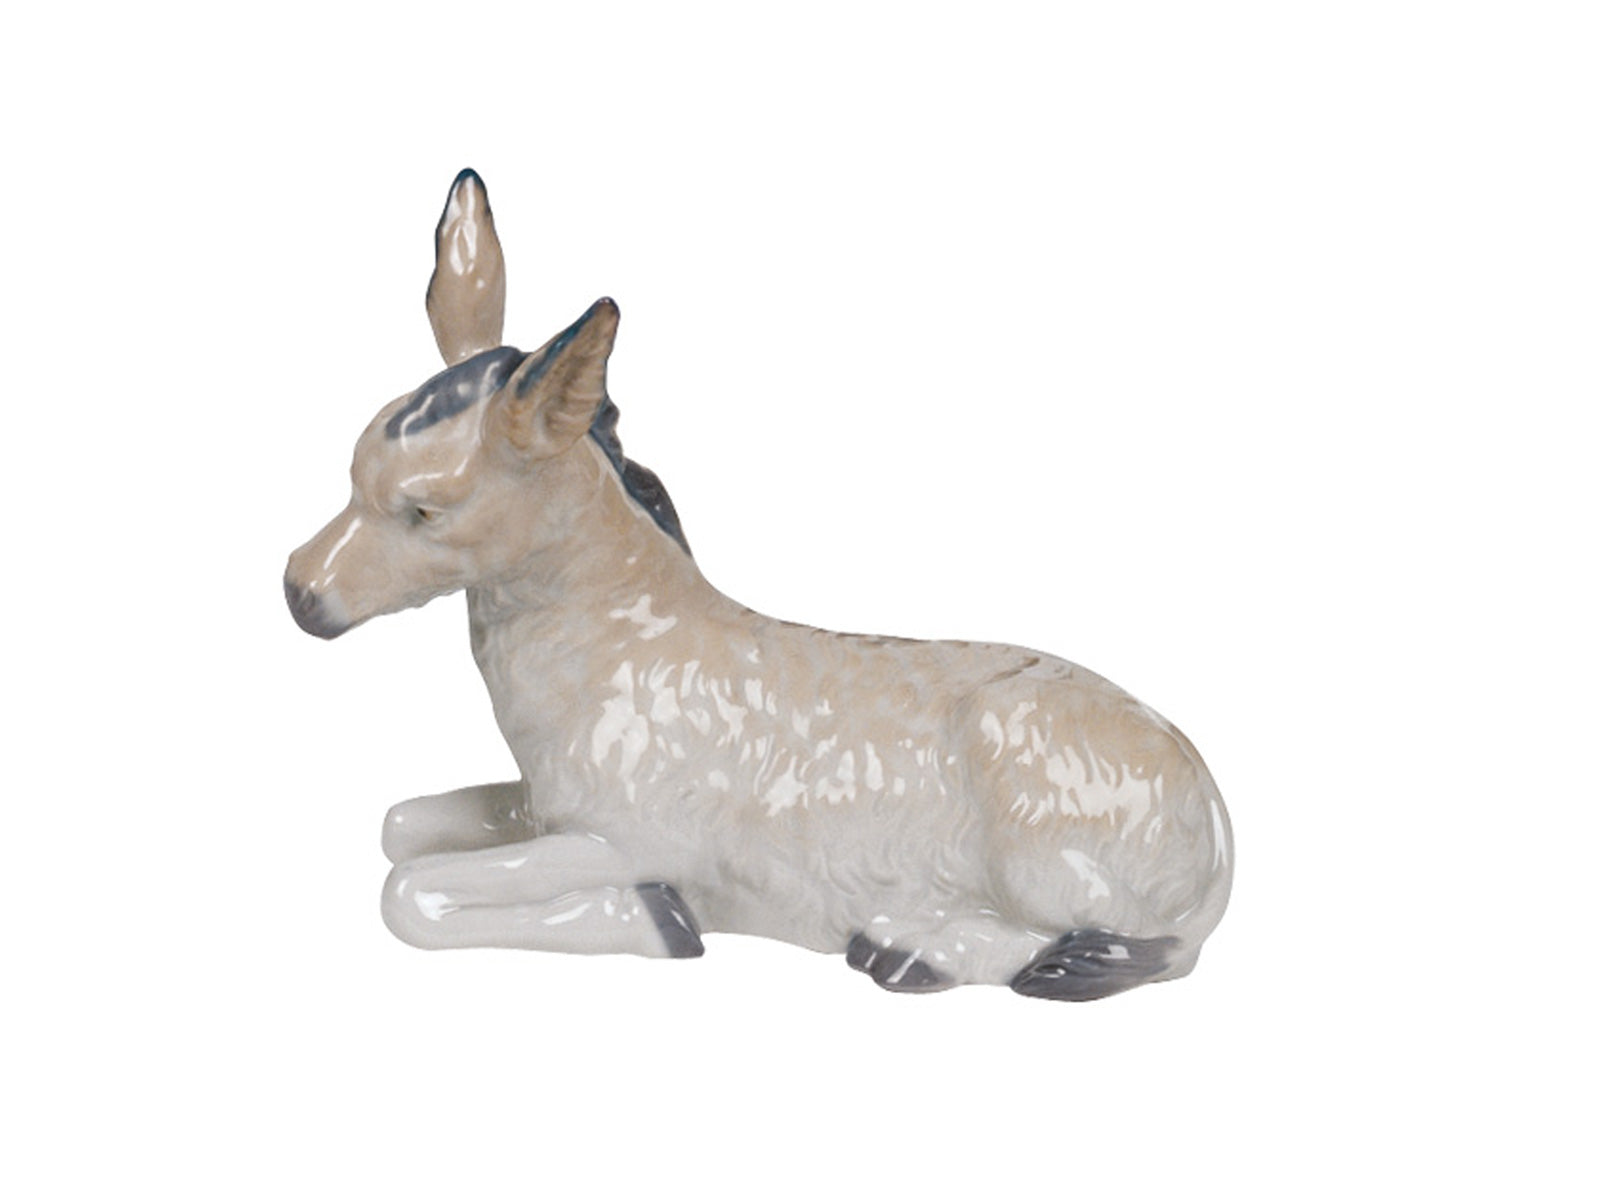 This is adorable sculpture of a Donkey comes in a shiny grey with fine details, it is a perfect addition to a Nativity or Animal Nao collection.